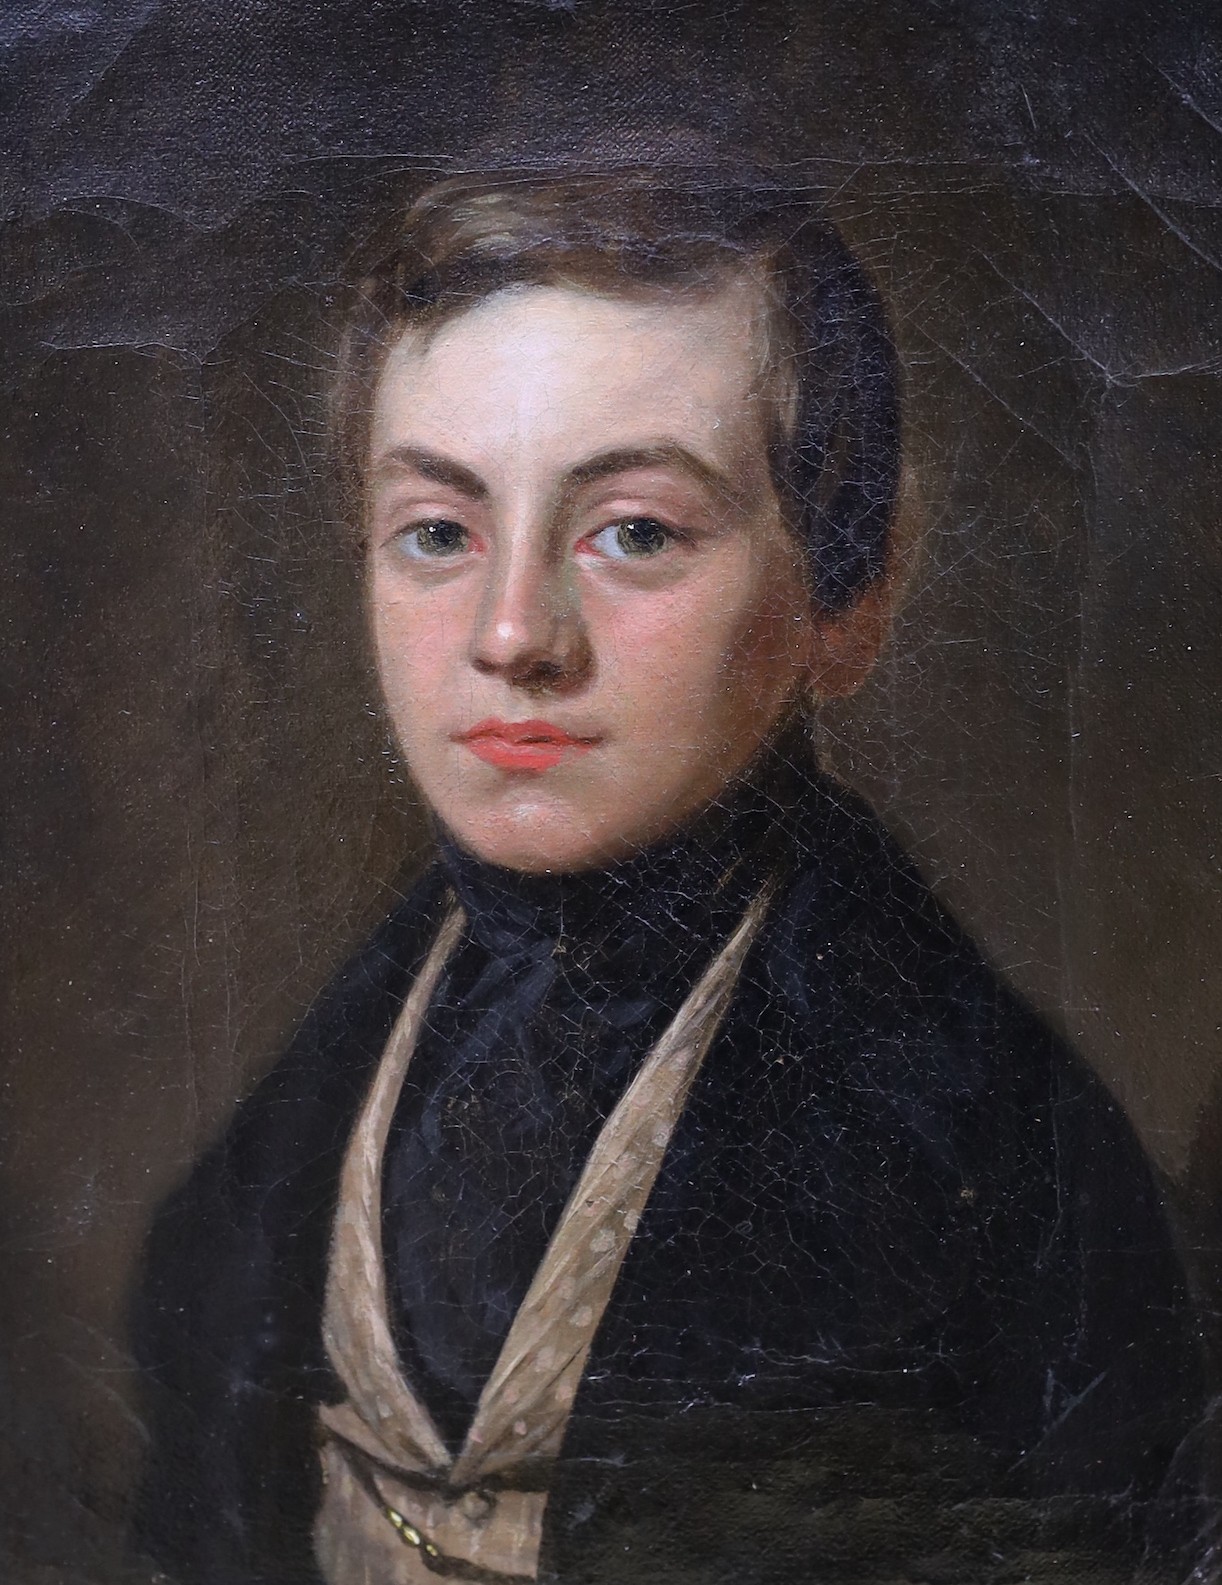 19th century Continental School, oil on canvas, Portrait of a young man, 25 x 20cm